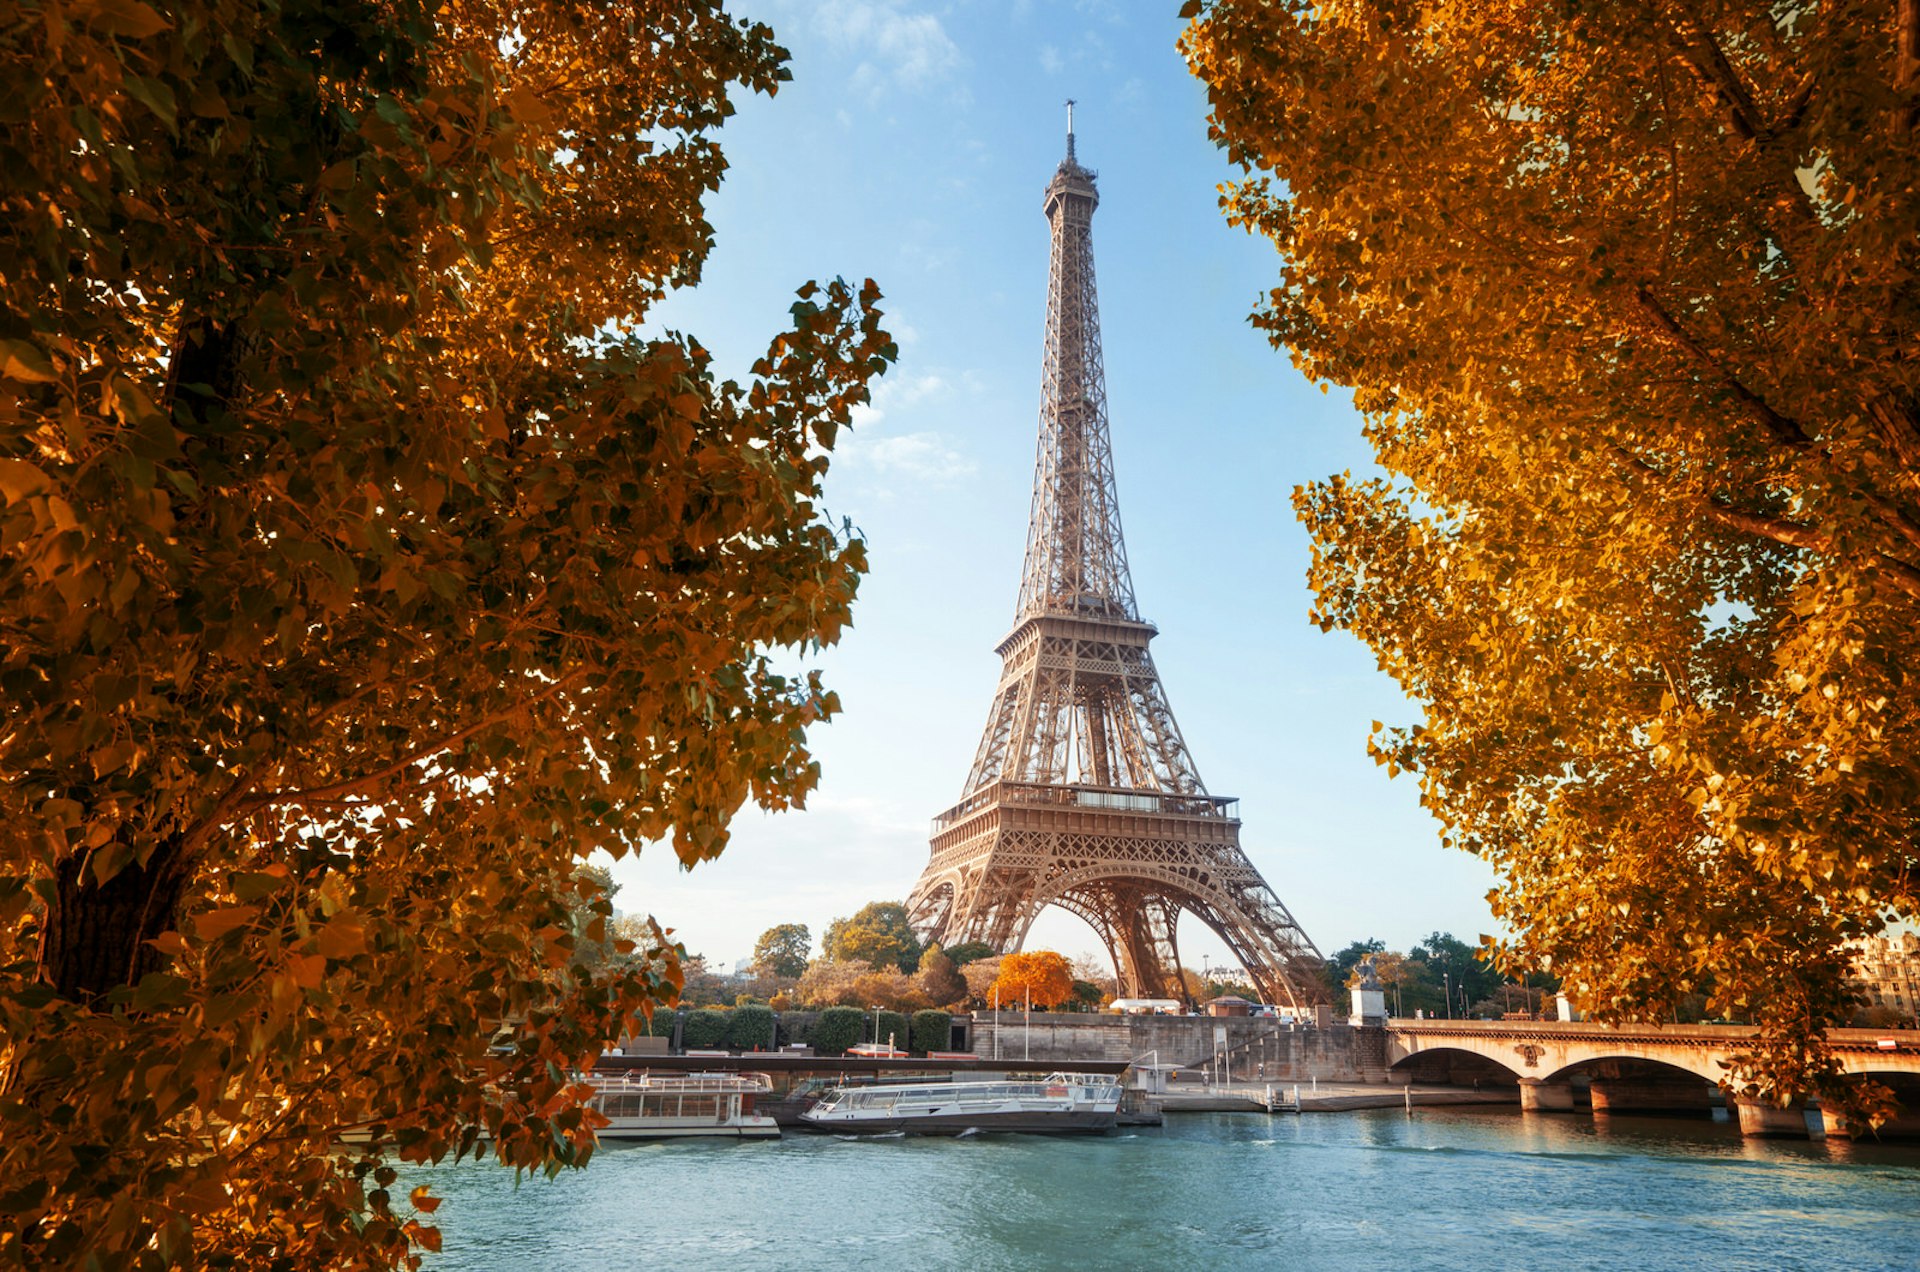 The Eiffel Tower framed by trees with colorful fall leaves in Paris, France